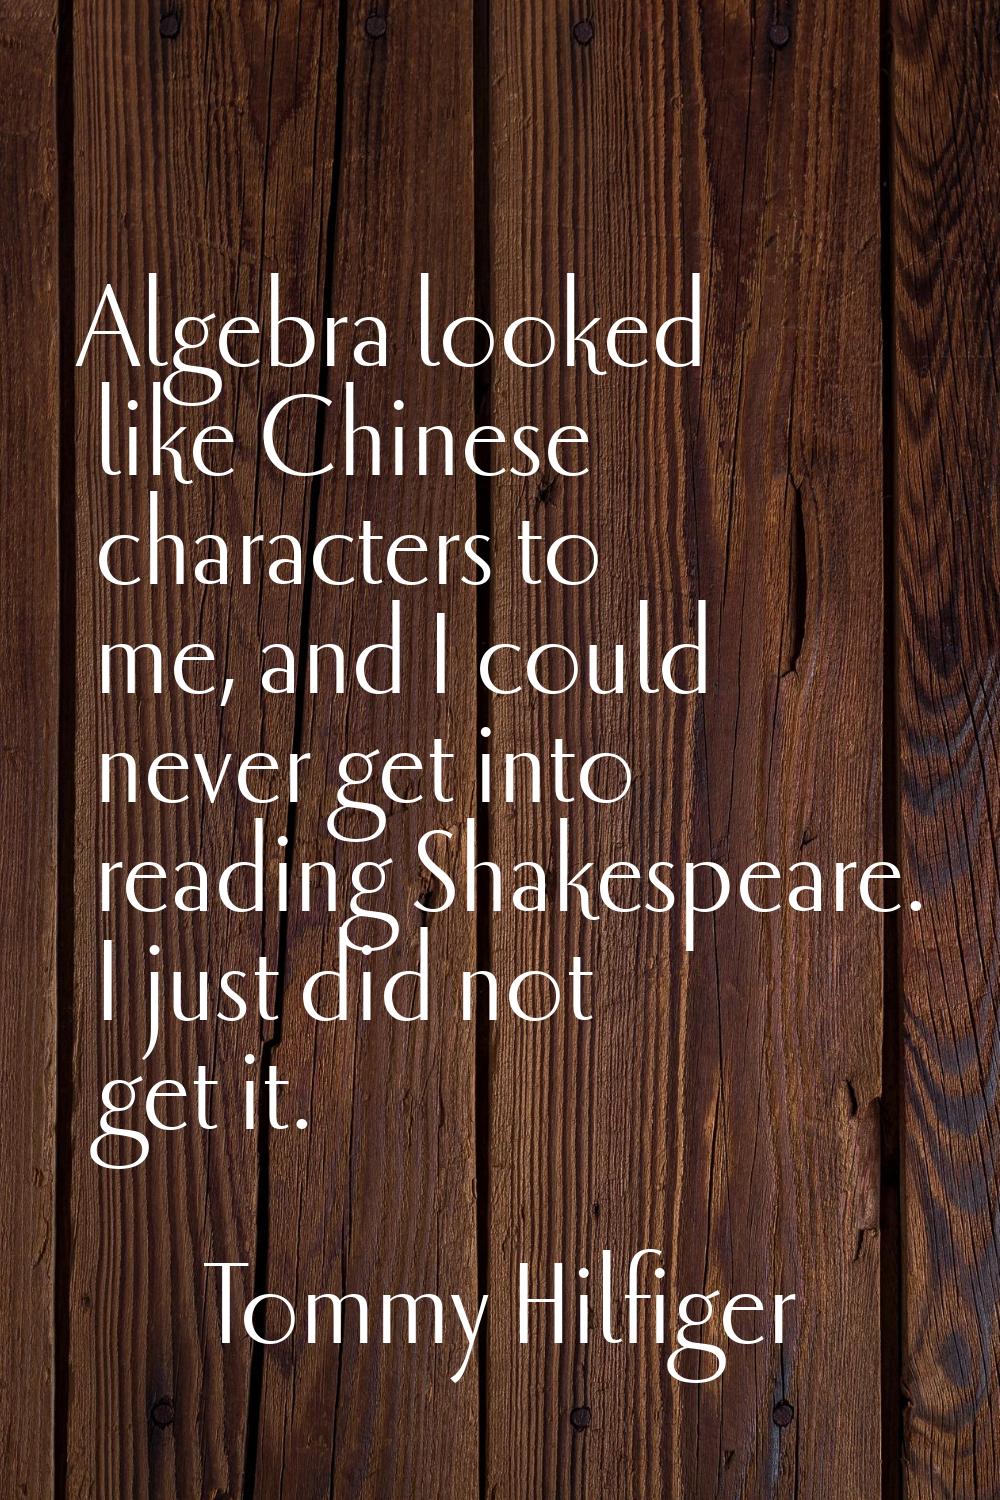 Algebra looked like Chinese characters to me, and I could never get into reading Shakespeare. I jus